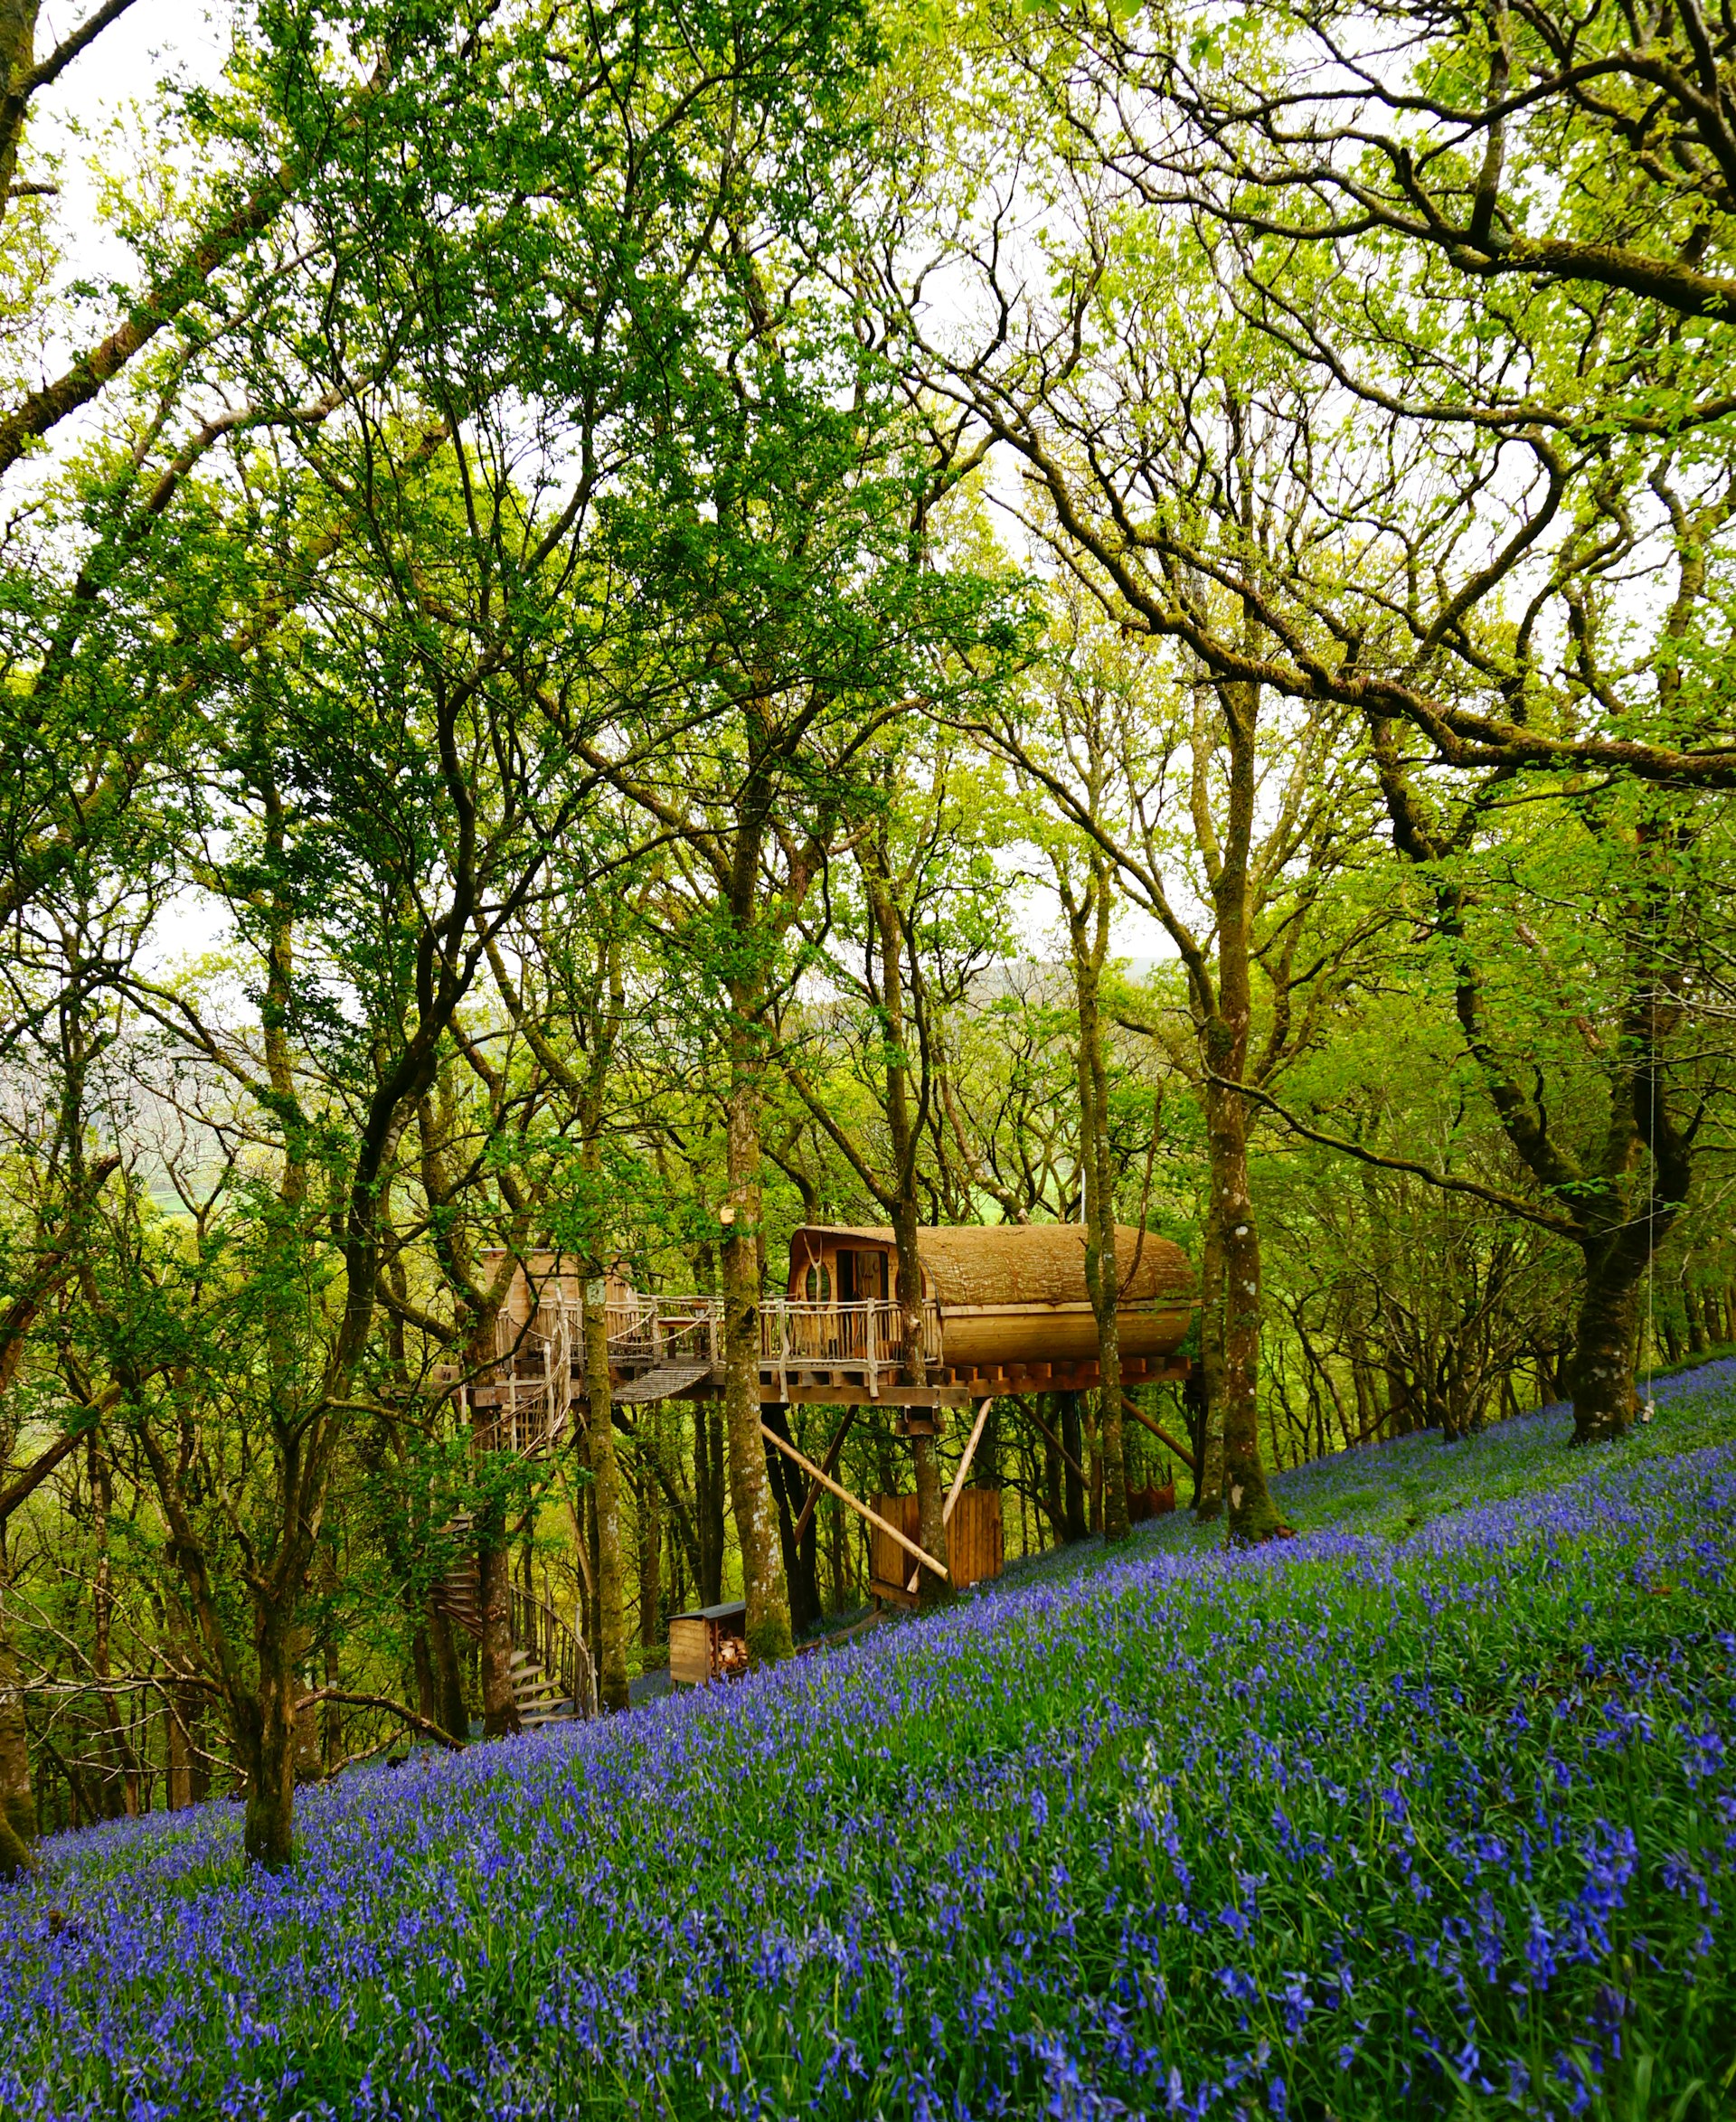 A wooden treehouse stands among woodland. Bluebells carpet the ground